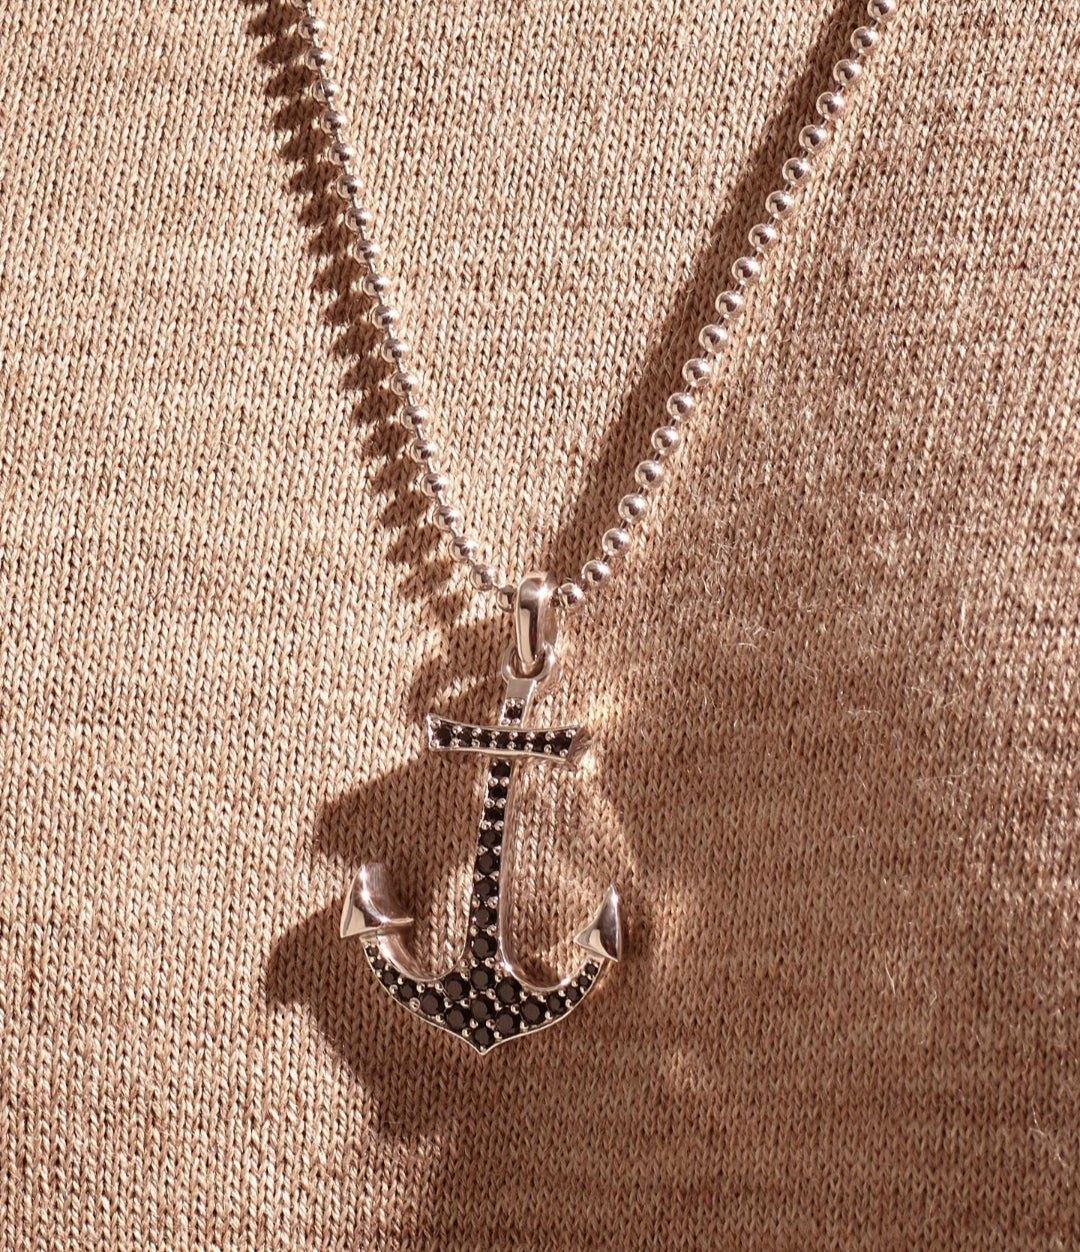 RARE PRINCE by CARAT SUTRA | Unique Designed Sailor's Anchor Pendant Studded with Black Zircons for Men, 925 Sterling Silver Pendant | Men's Jewelry | With Certificate of Authenticity and 925 Hallmark - caratsutra